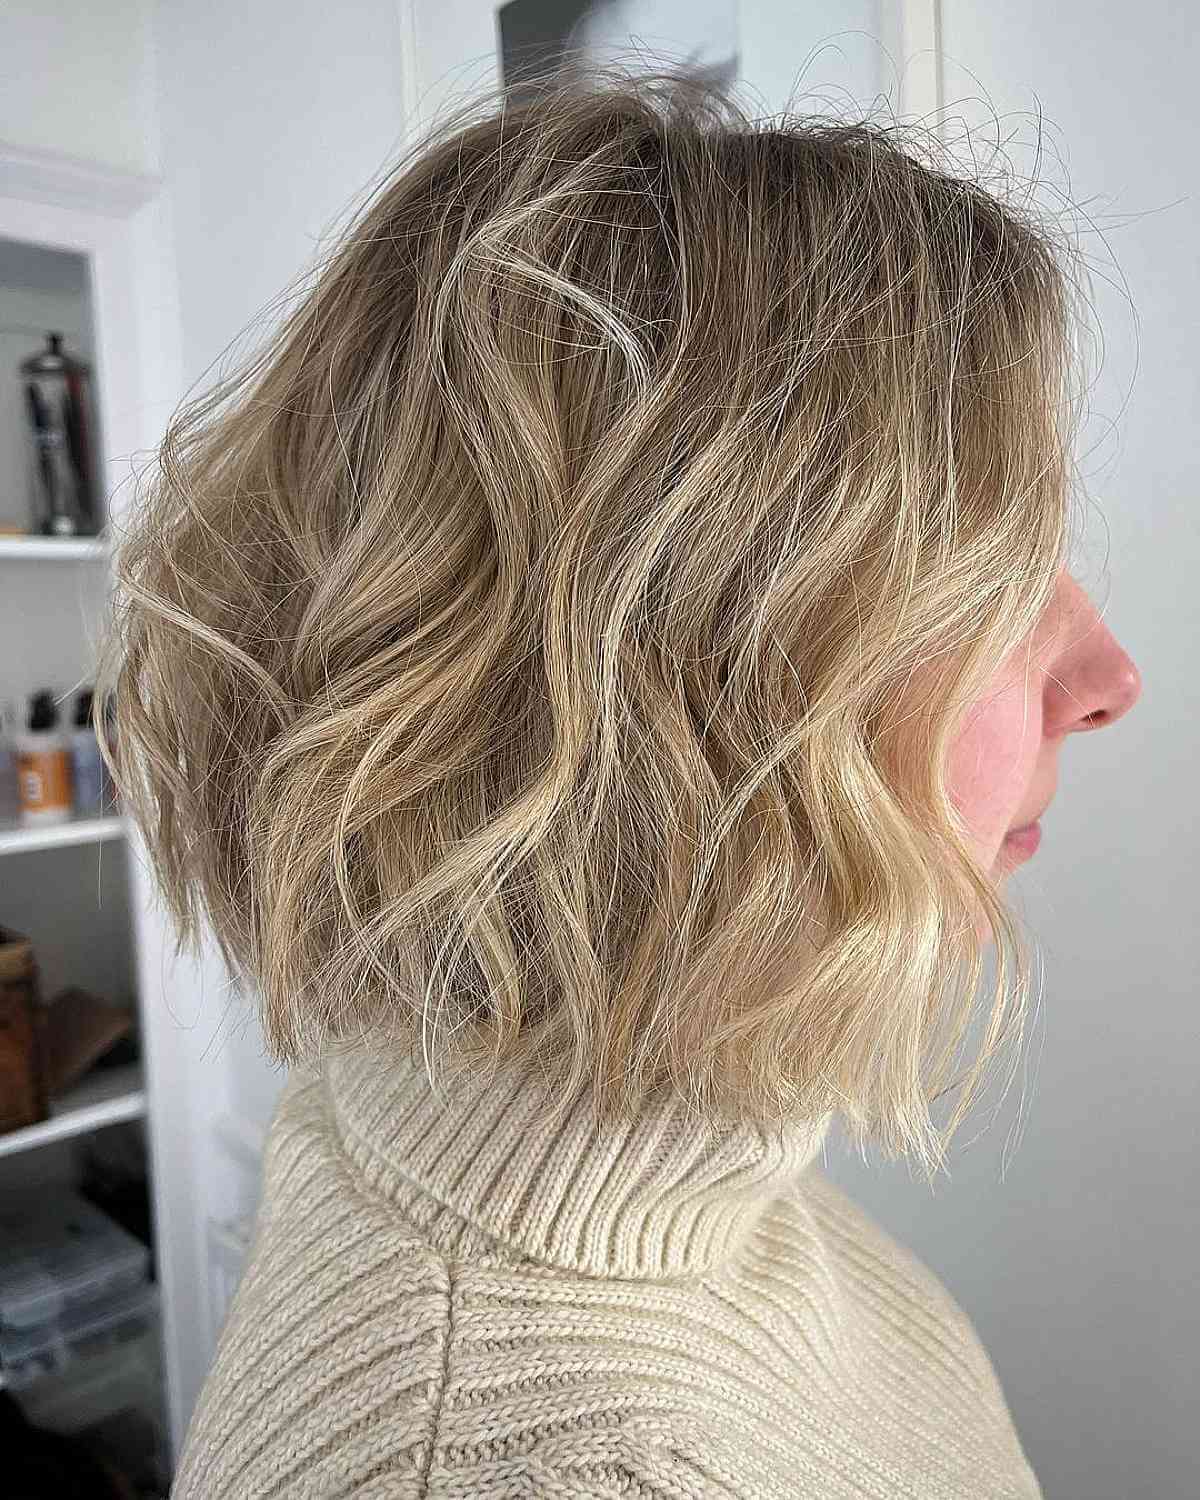 26 perfect hairstyles for fine hair in 2019